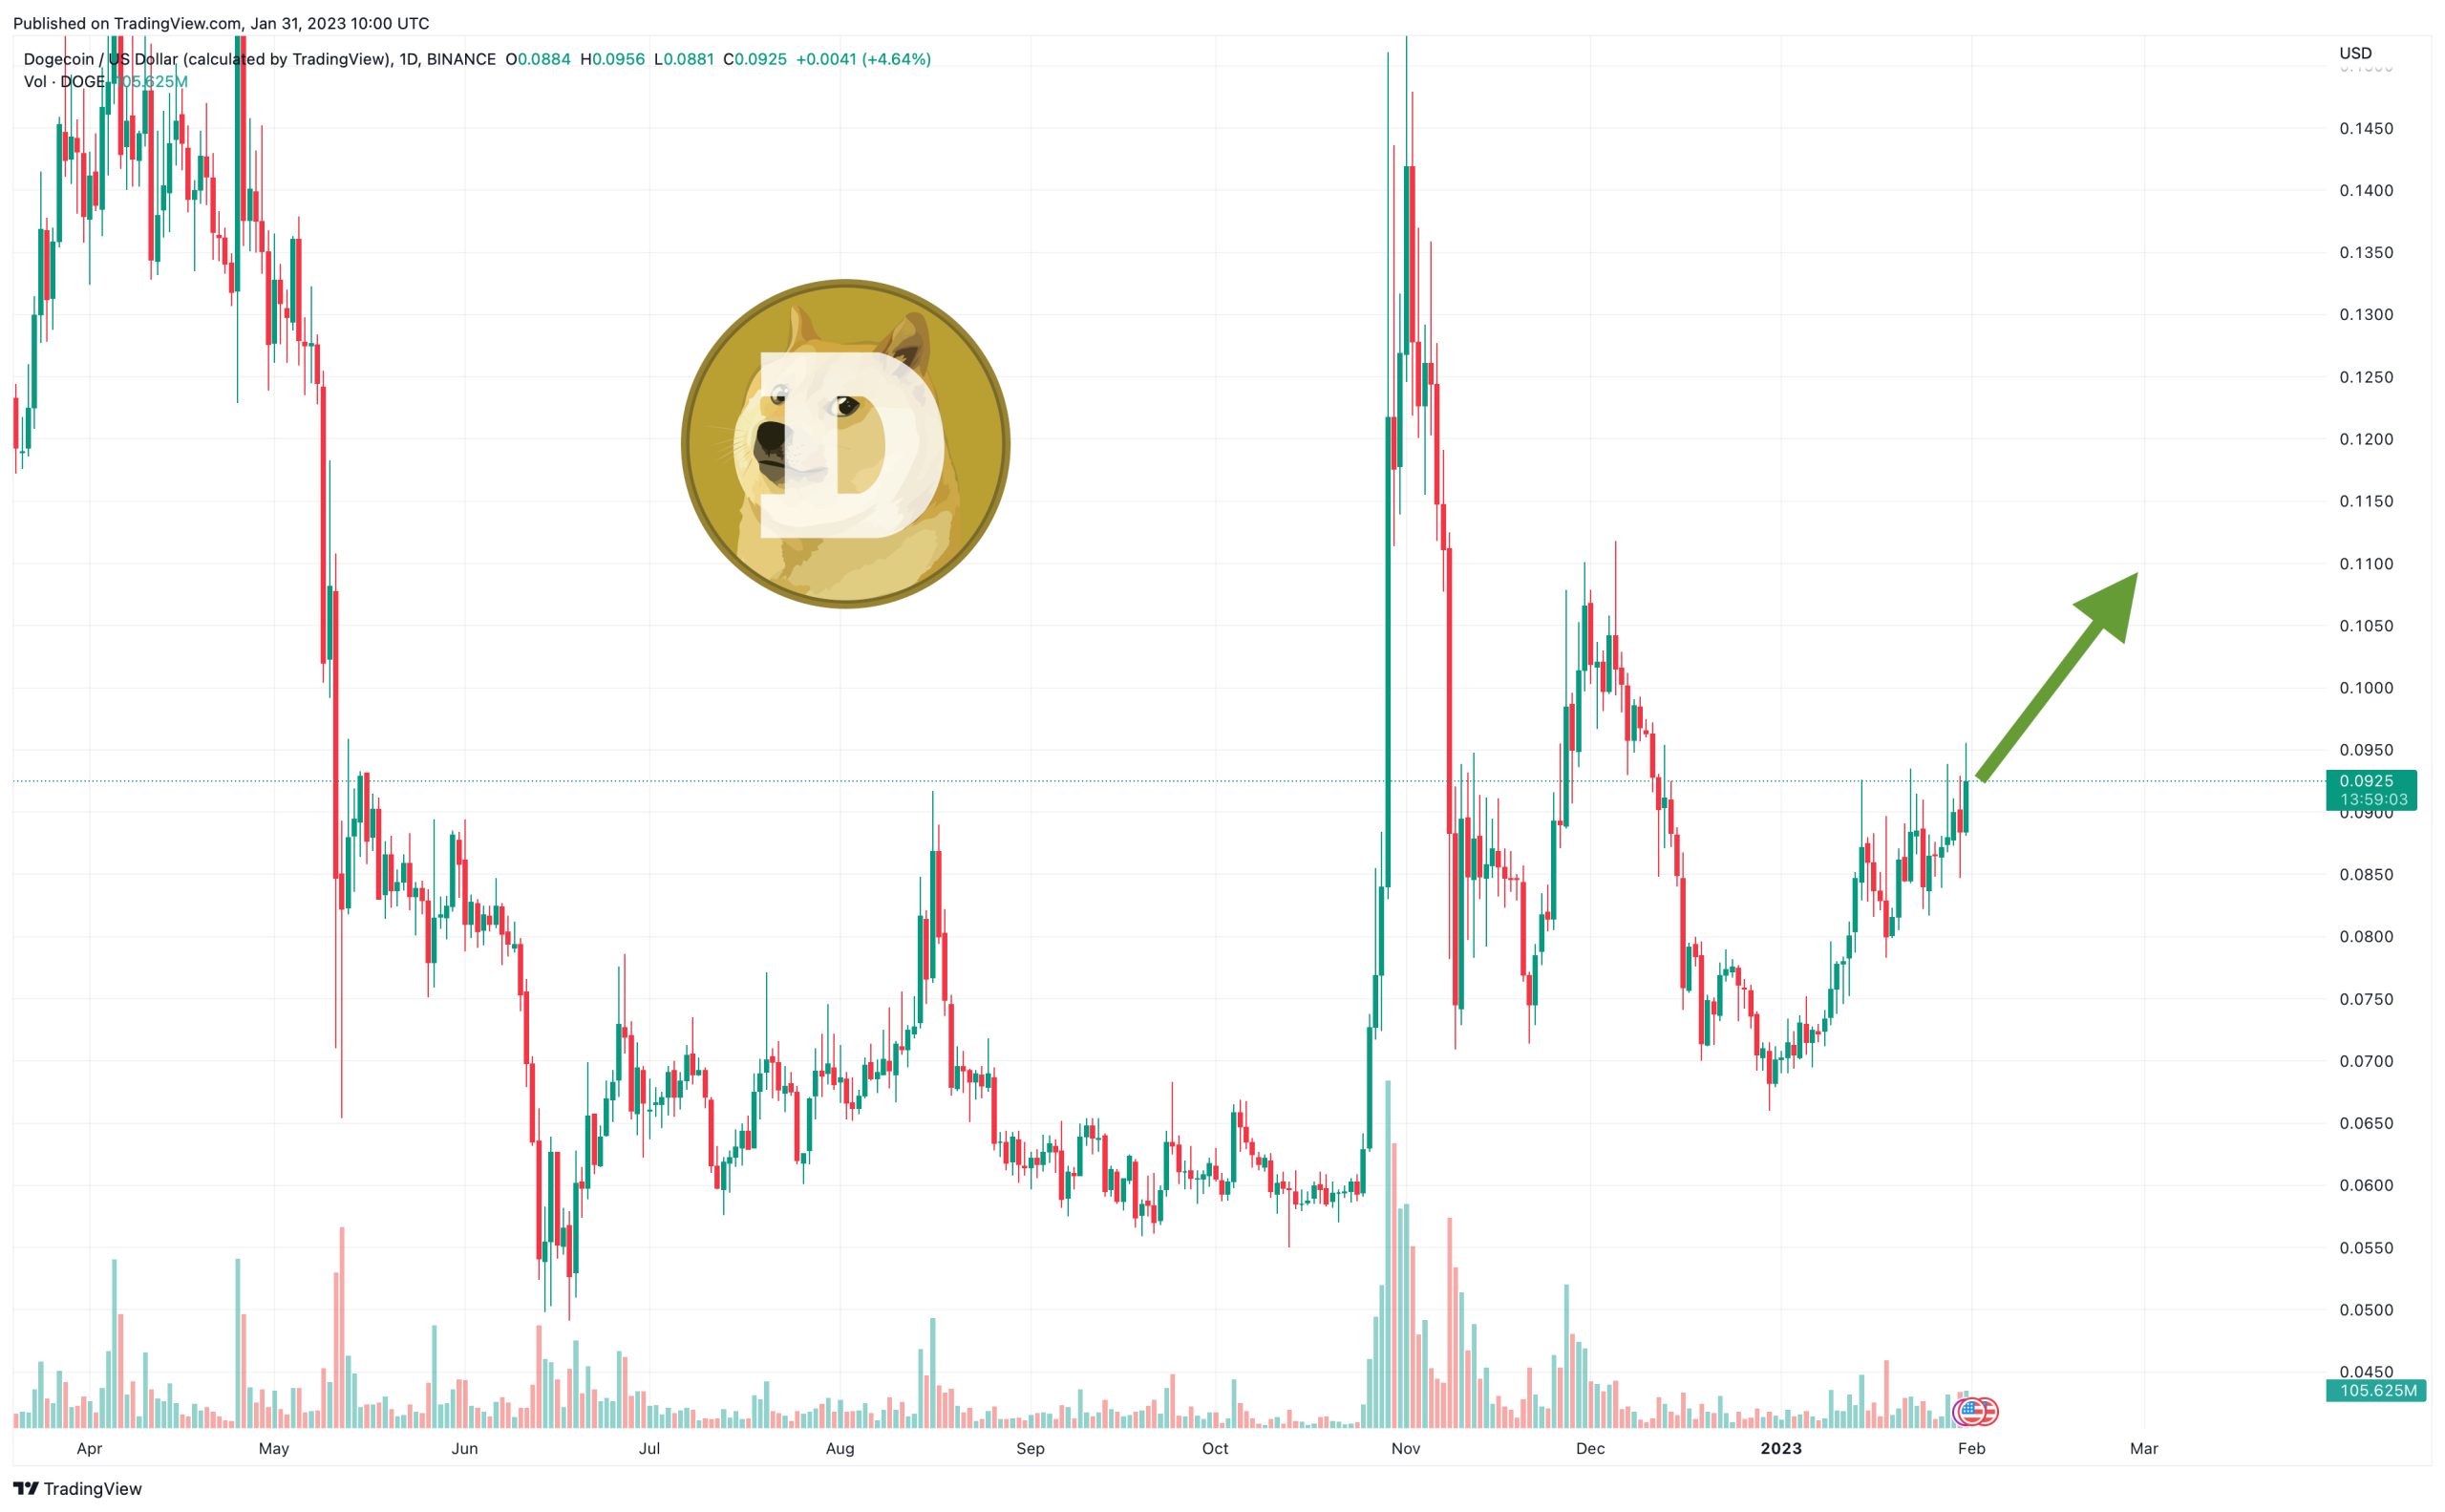 Dogecoin Price Prediction by Elon Musk – Is DOGE Going to Hit $1?